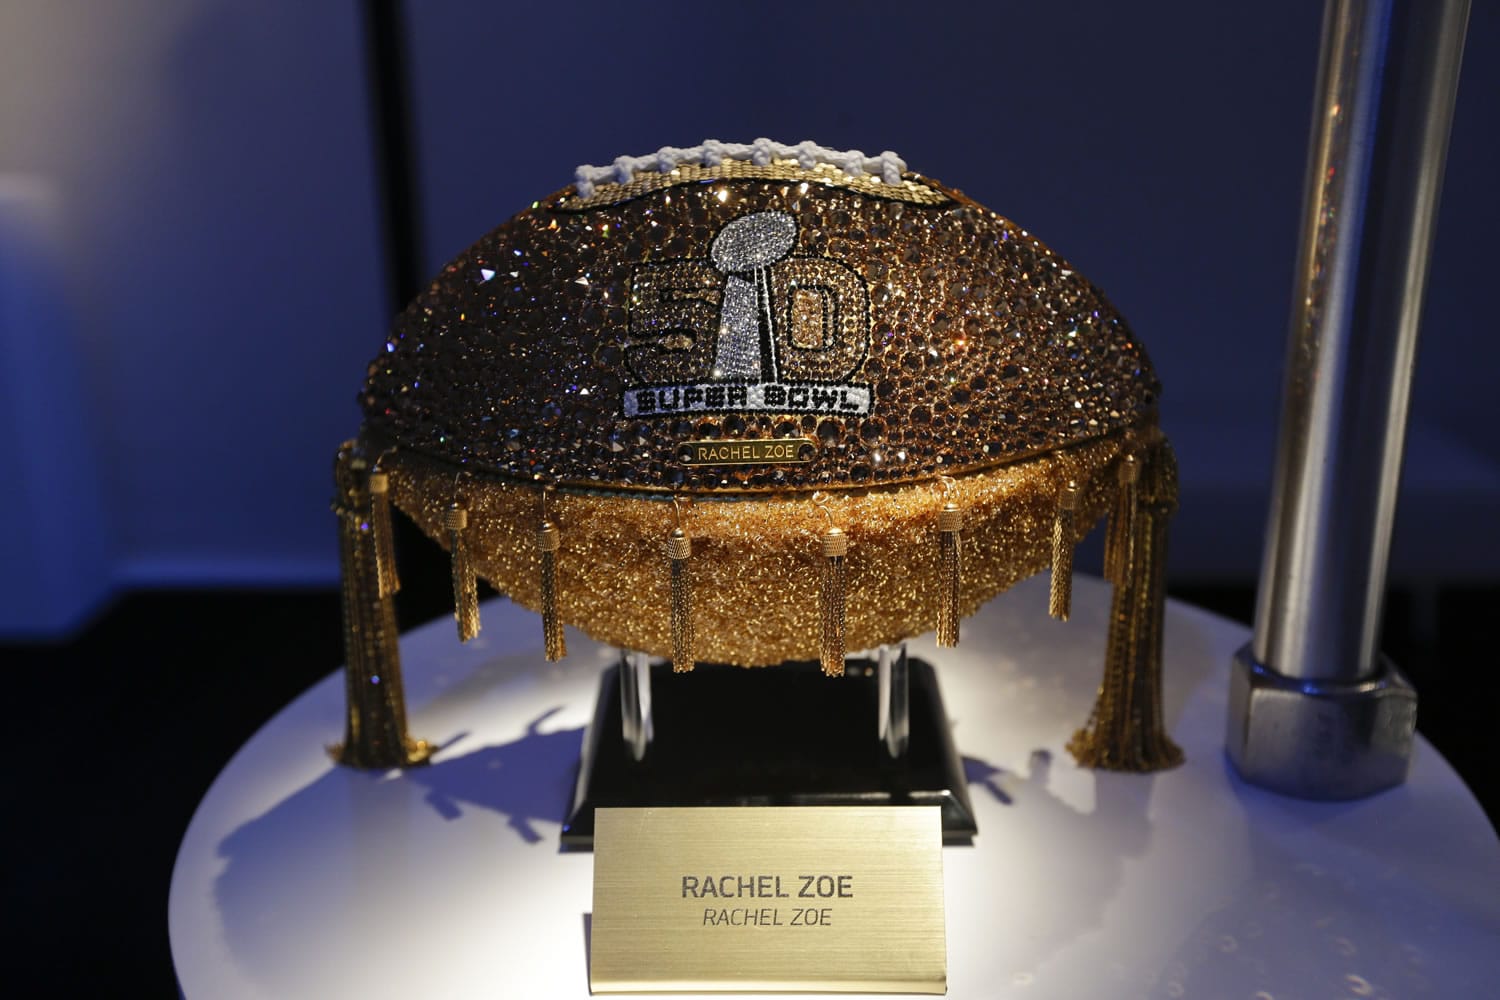 A Rachel Zoe designed football is displayed at the unveiling of the CFDA Footballs Jan. 20 at the NFL headquarters in New York.  In celebration of Super Bowl 50 and in support of the NFL Foundation, the NFL and the Council of Fashion Designers of America have collaborated on 50 Bespoke Designer Footballs created by CFDA Members.